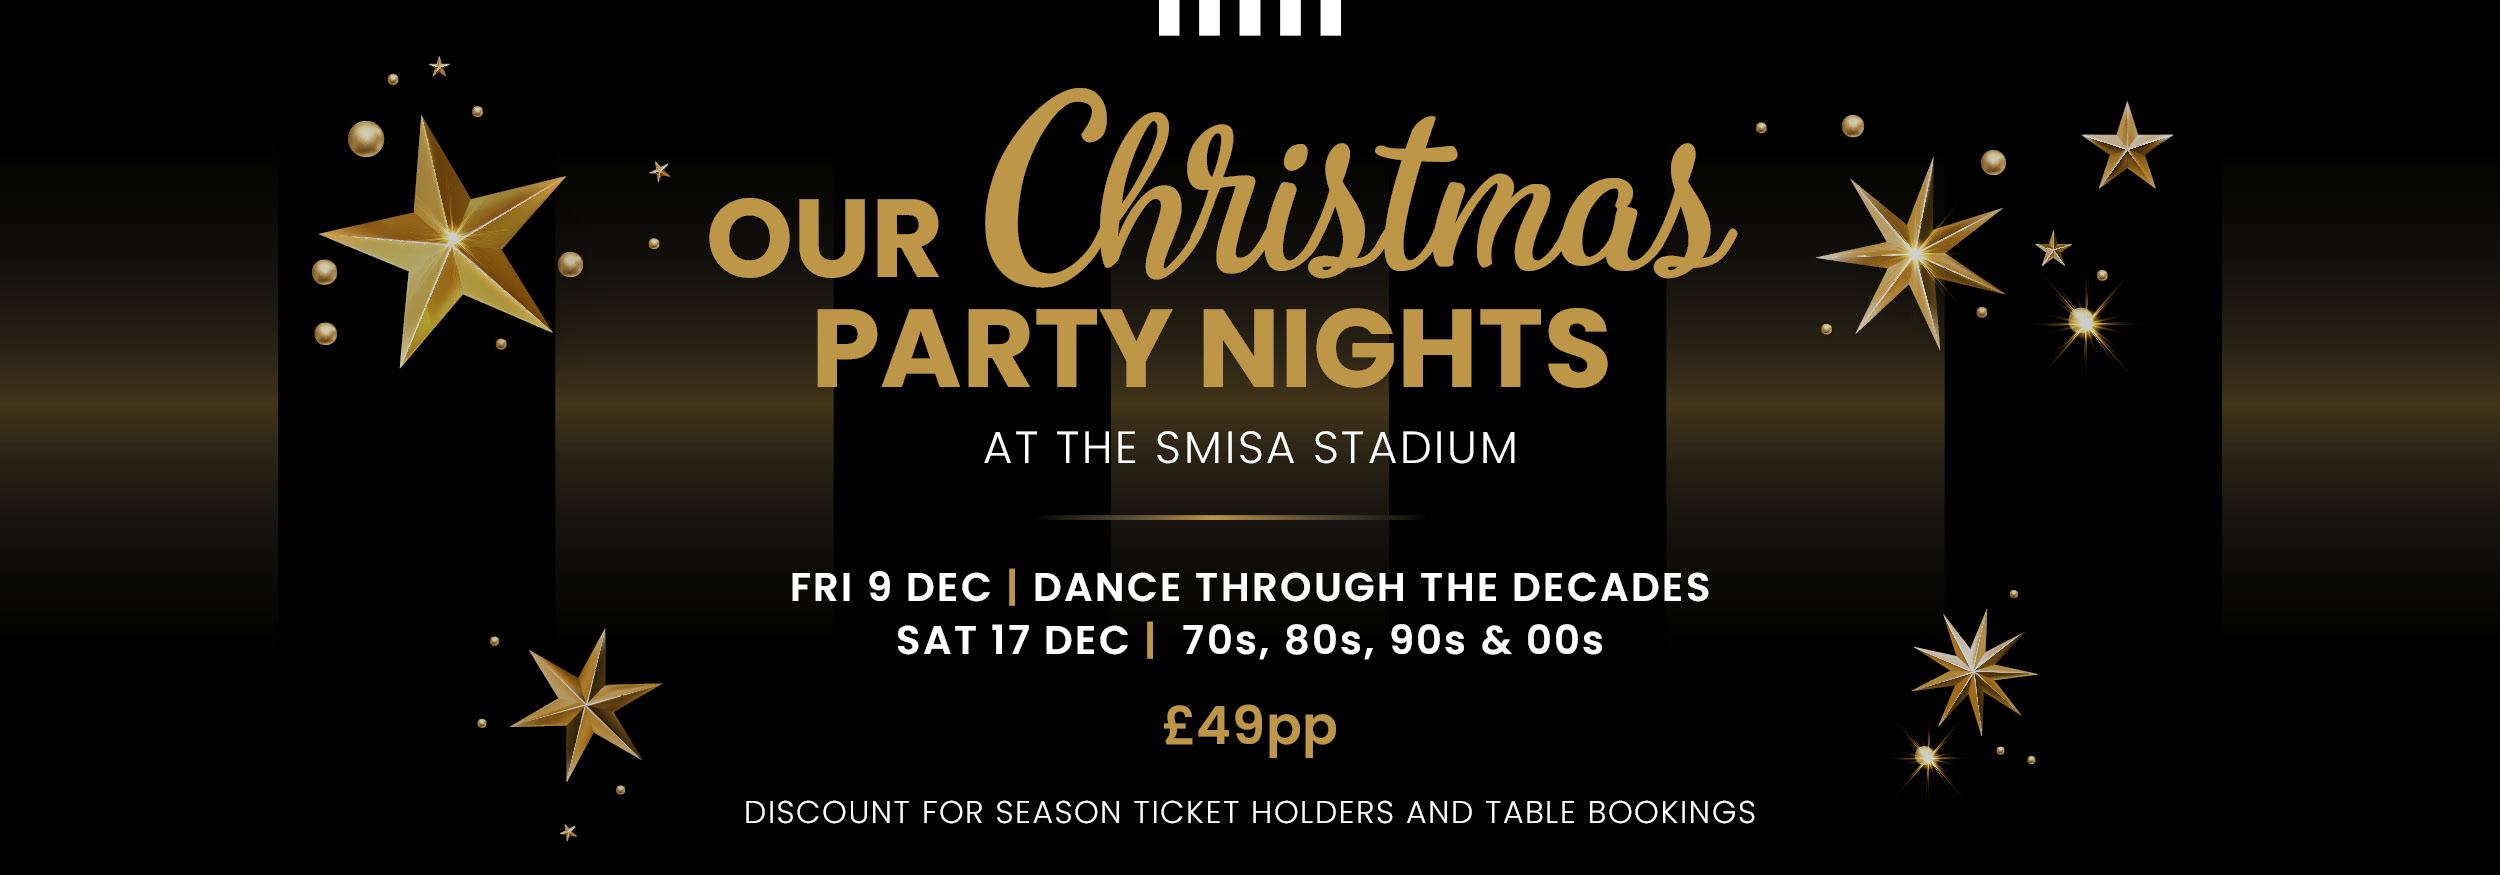 Our Christmas Party Nights